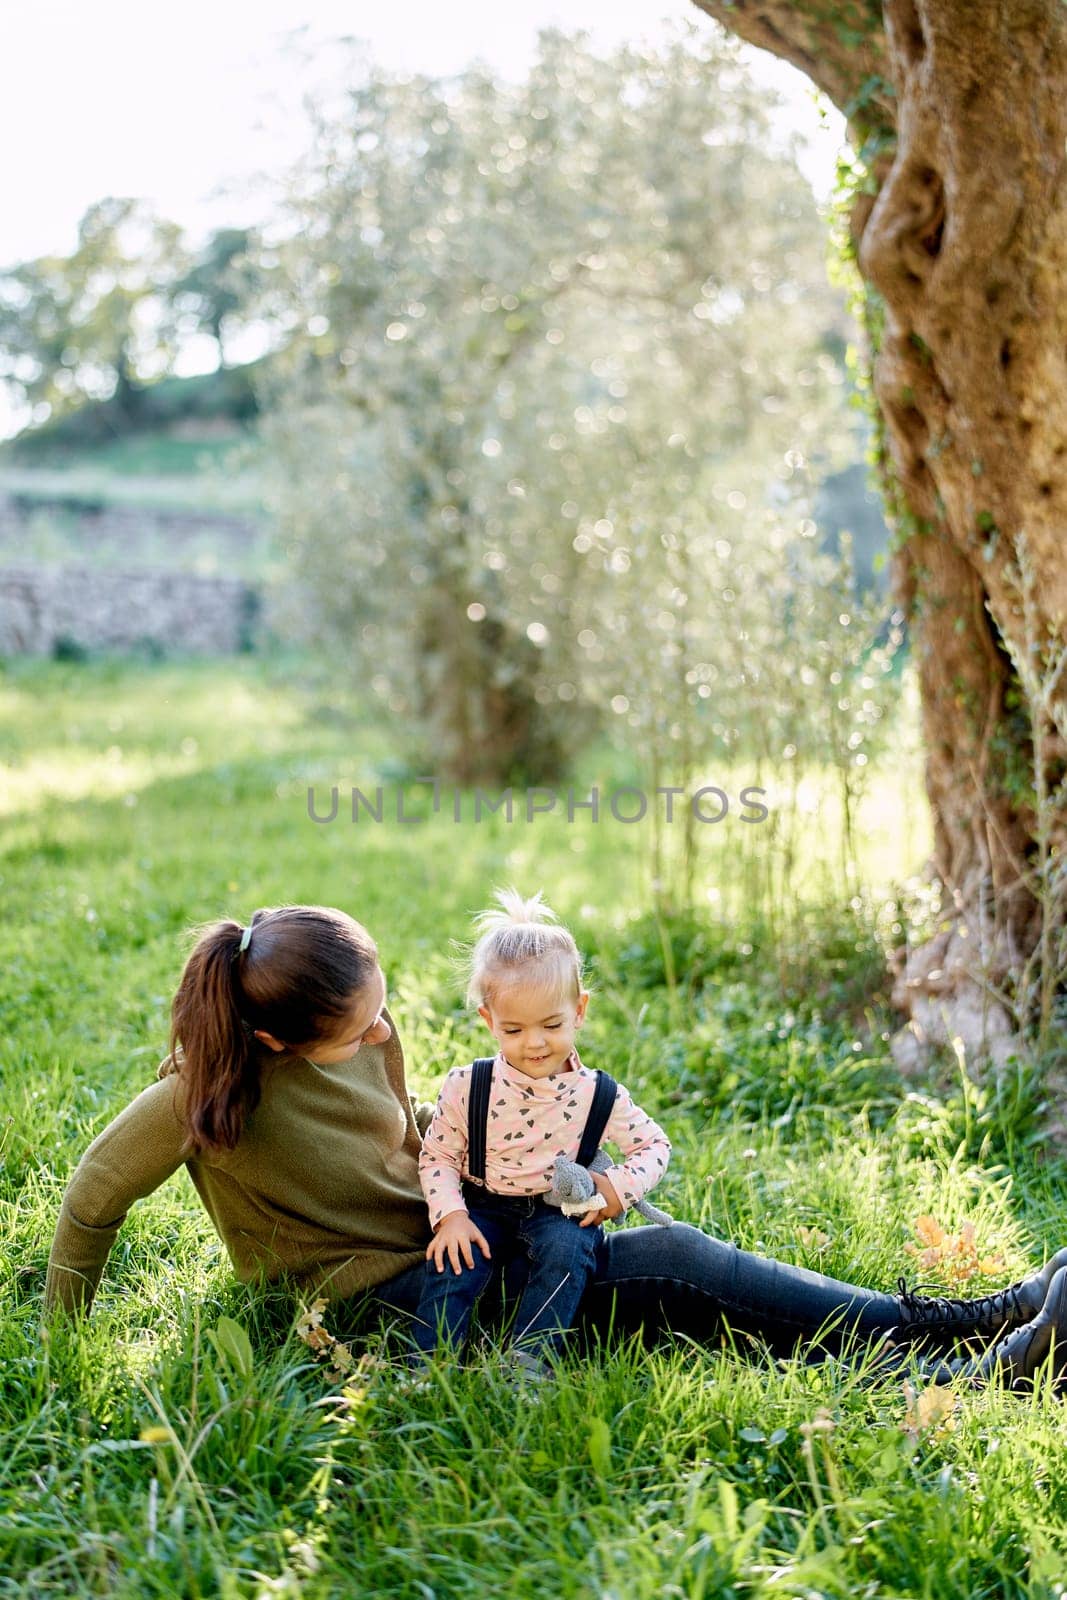 Mom looks at a little girl sitting on her lap near a tree. High quality photo